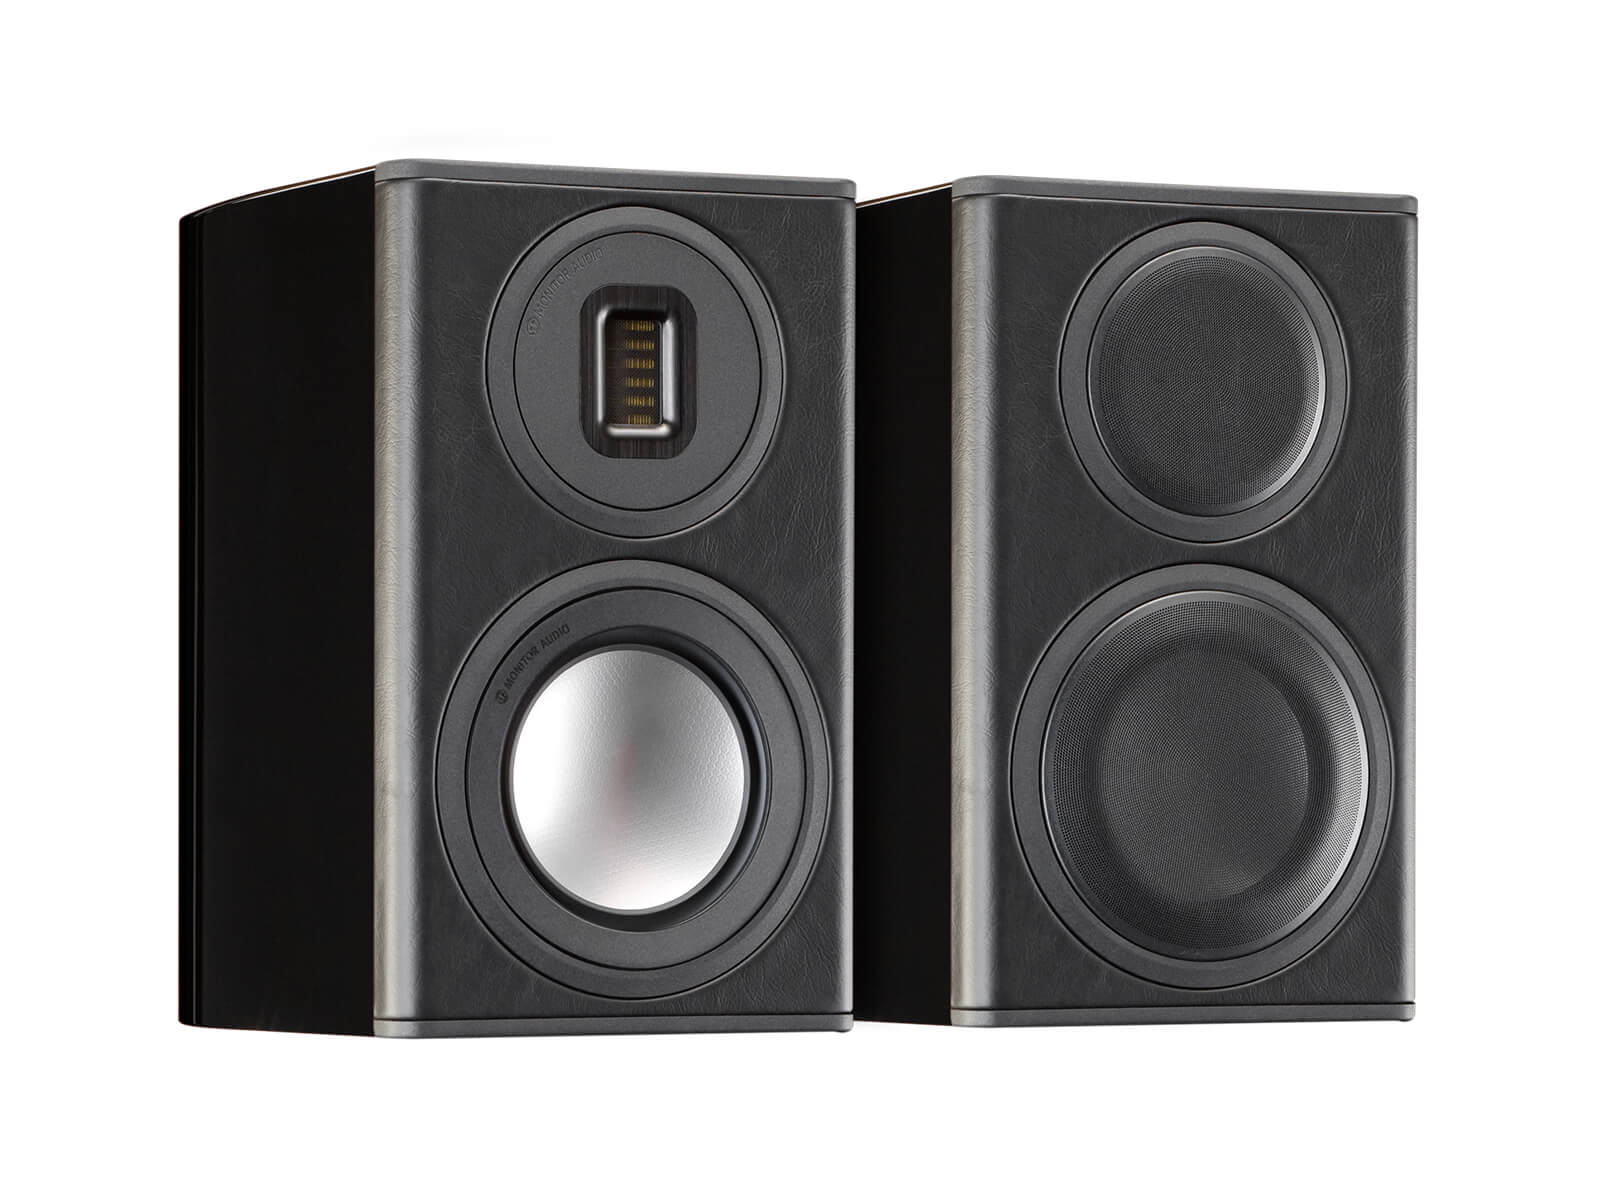 Platinum PL100 II, bookshelf speakers, featuring a grille and an ebony real wood veneer finish.